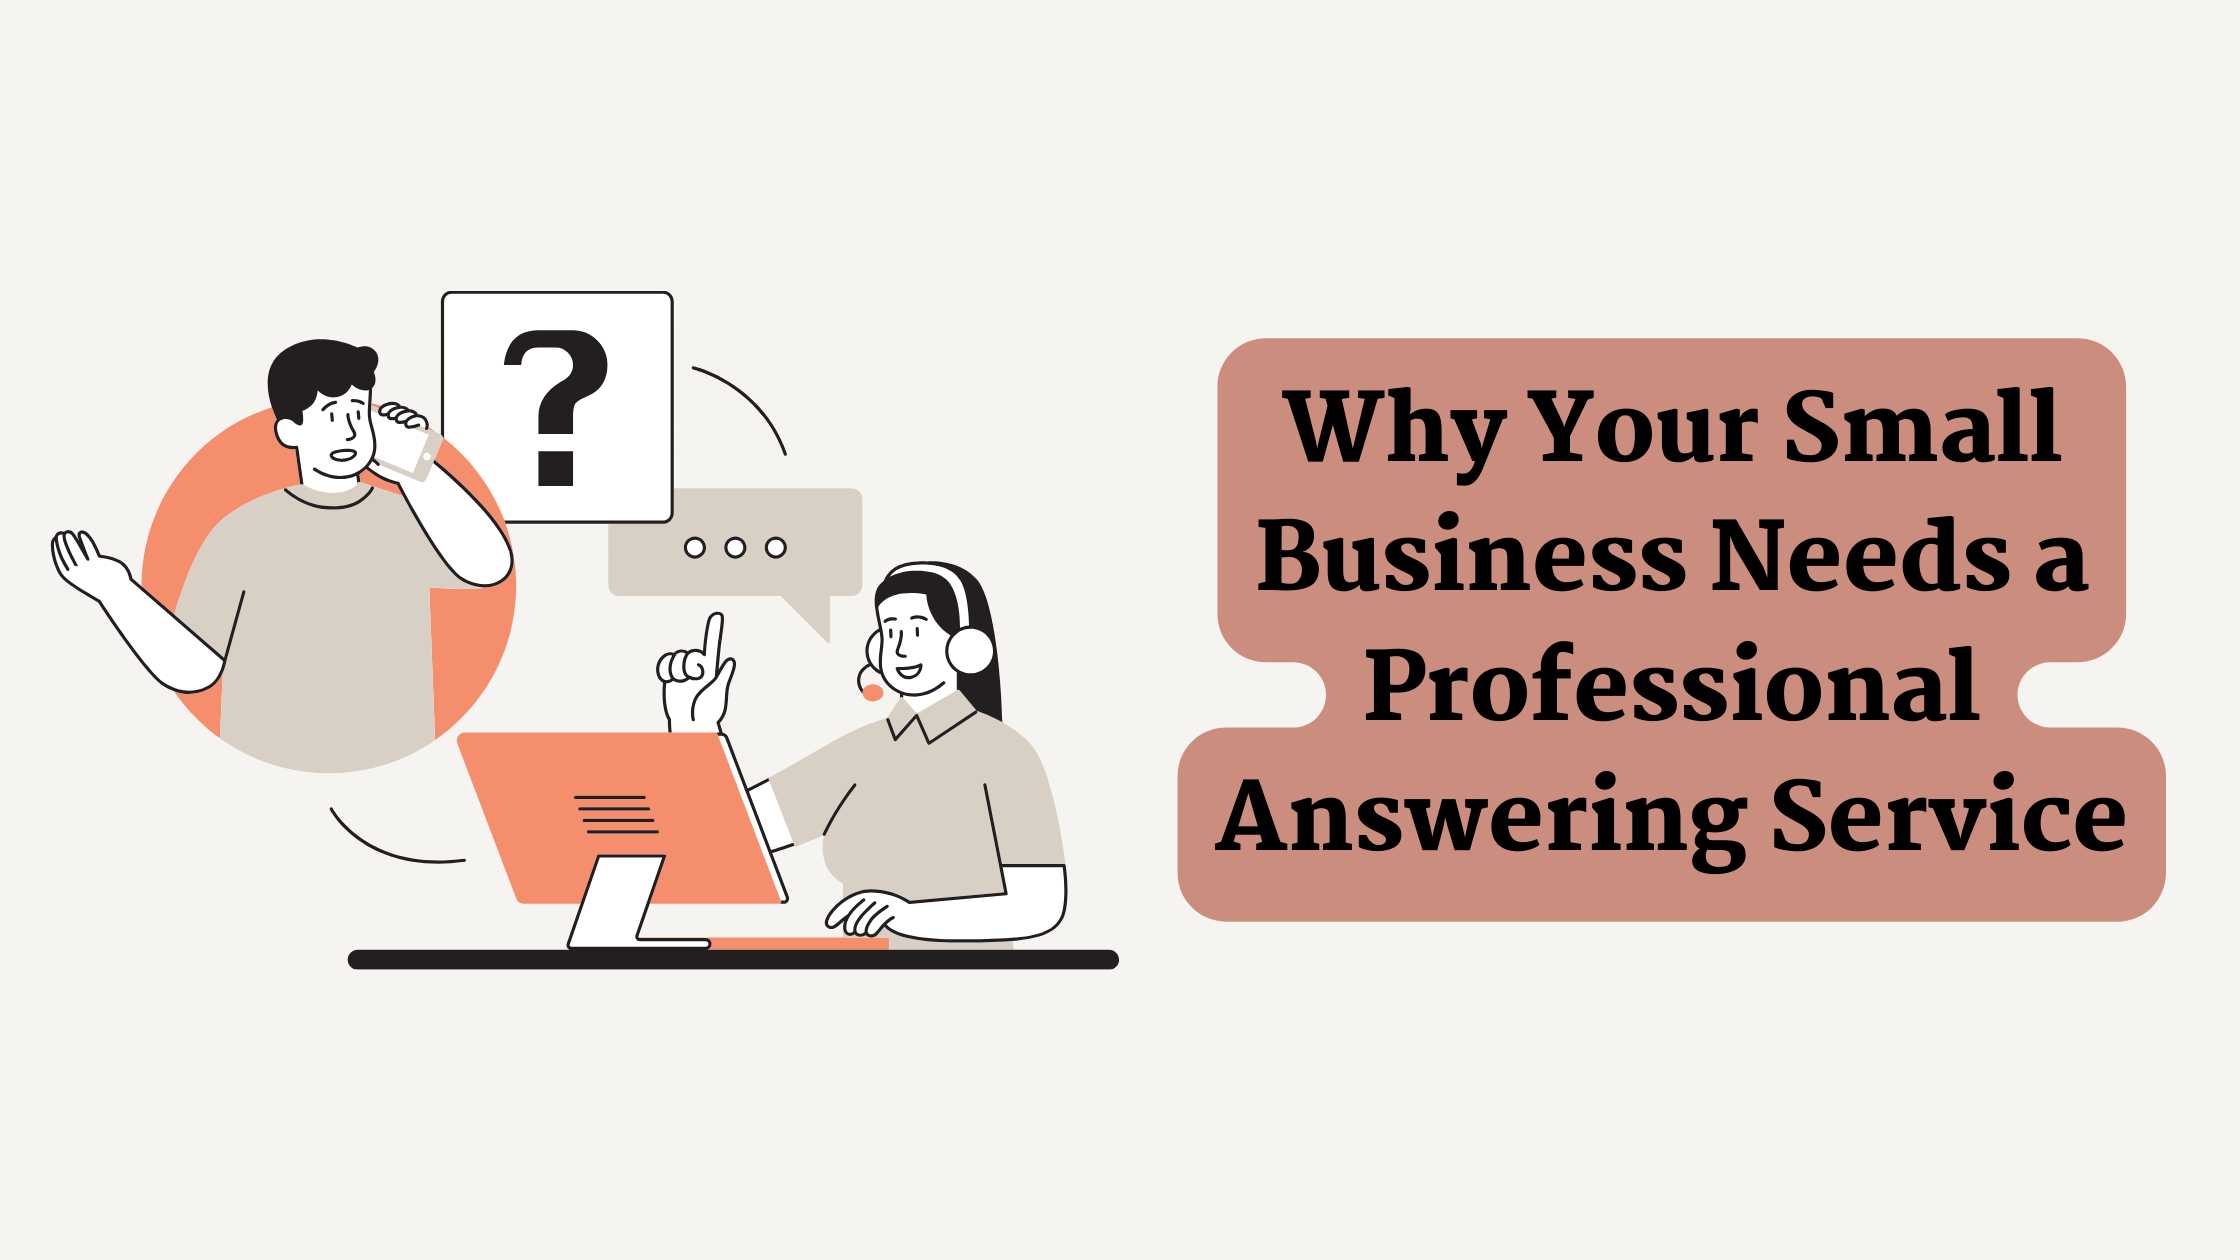 Why Your Small Business Needs a Professional Answering Service